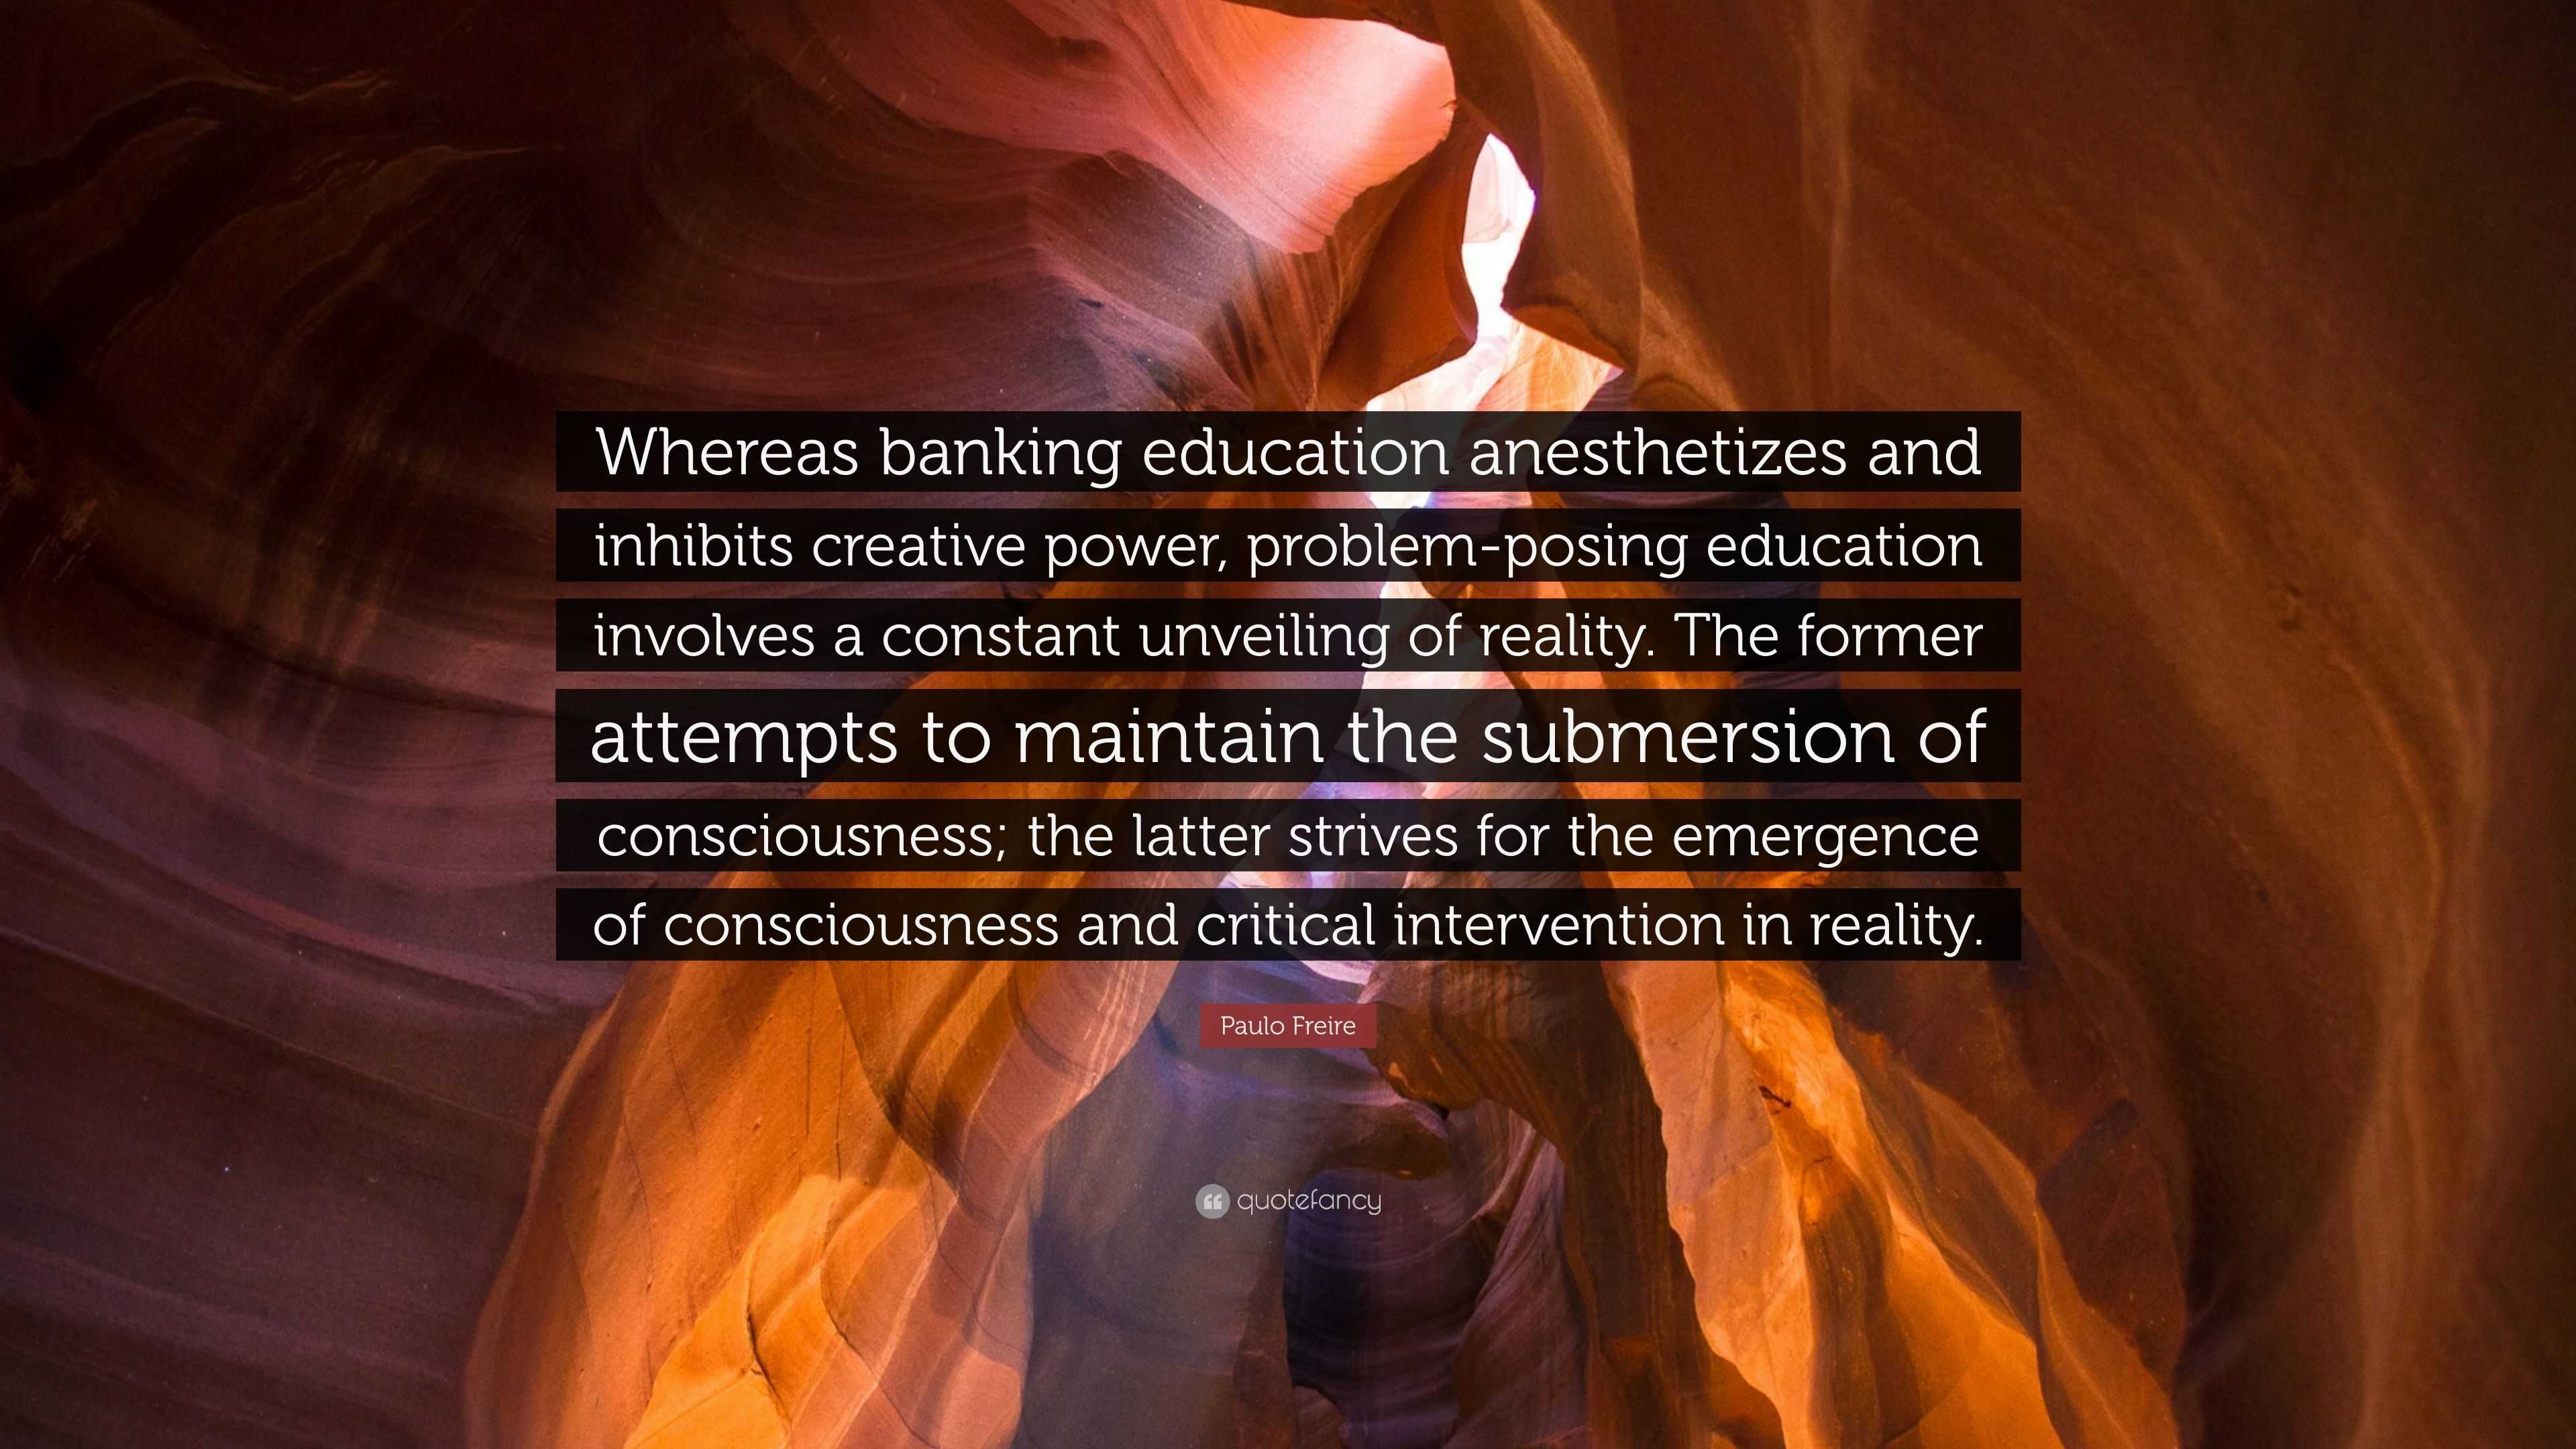 4151580 Paulo Freire Quote Whereas banking education anesthetizes and